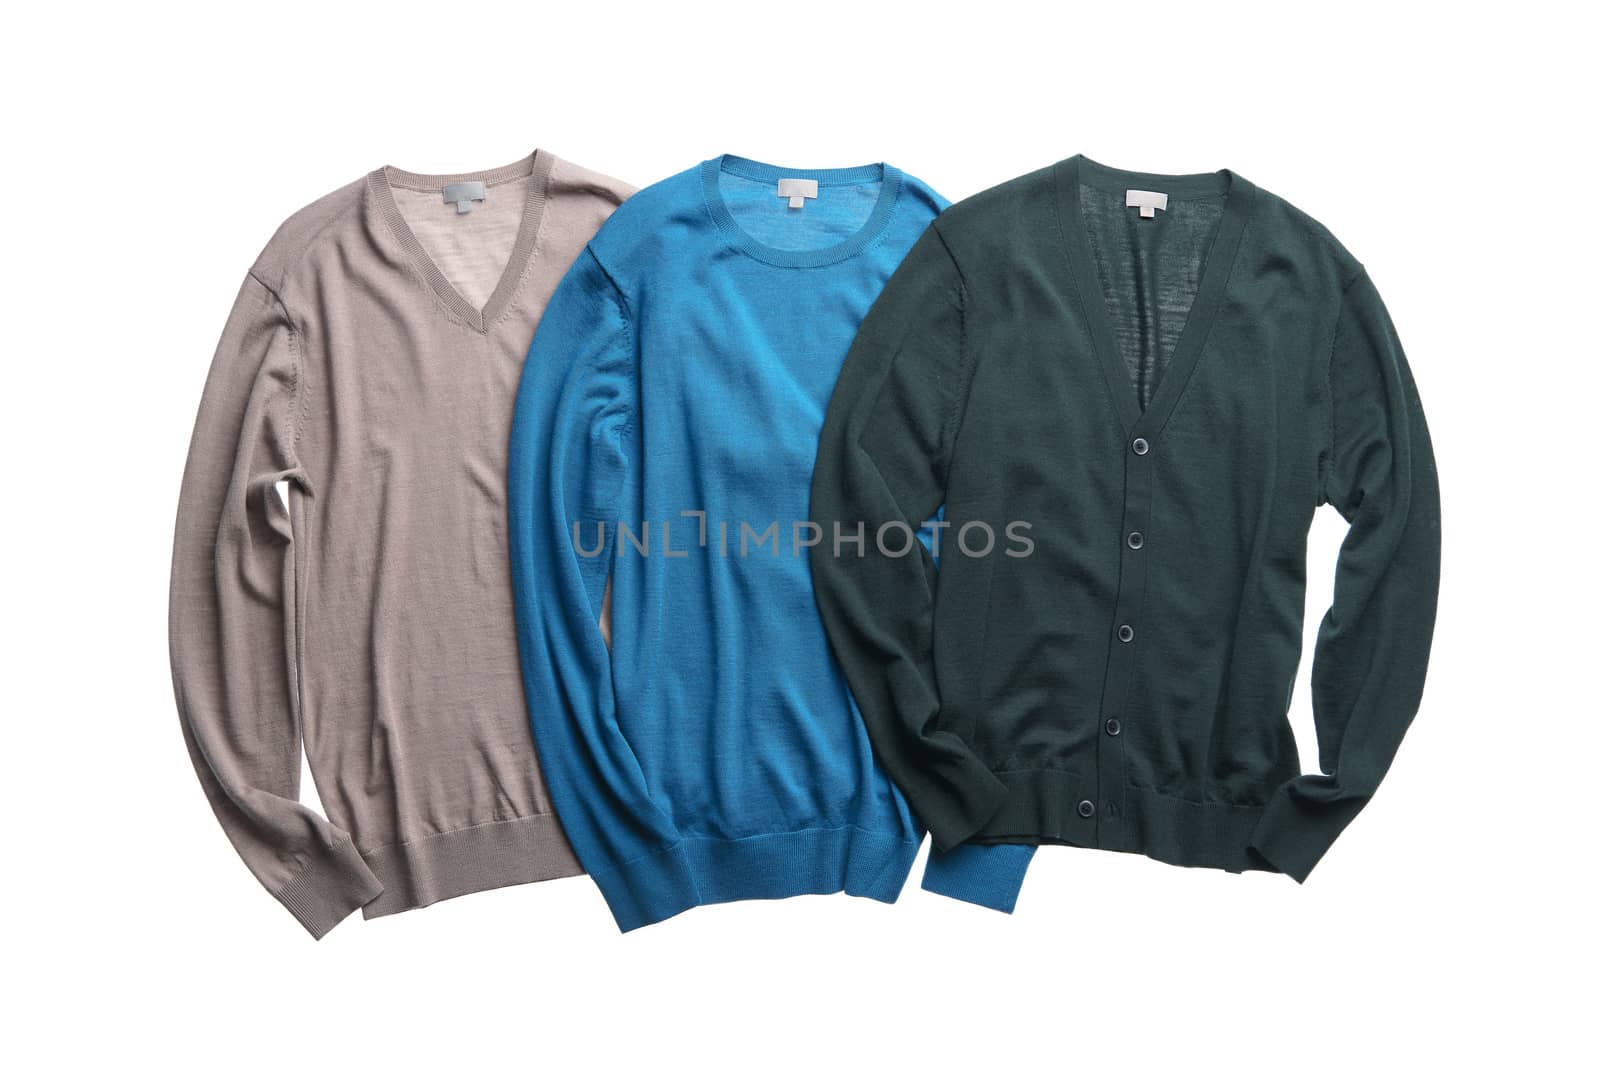 Three different color sweters; light gray, light blue and dark green.